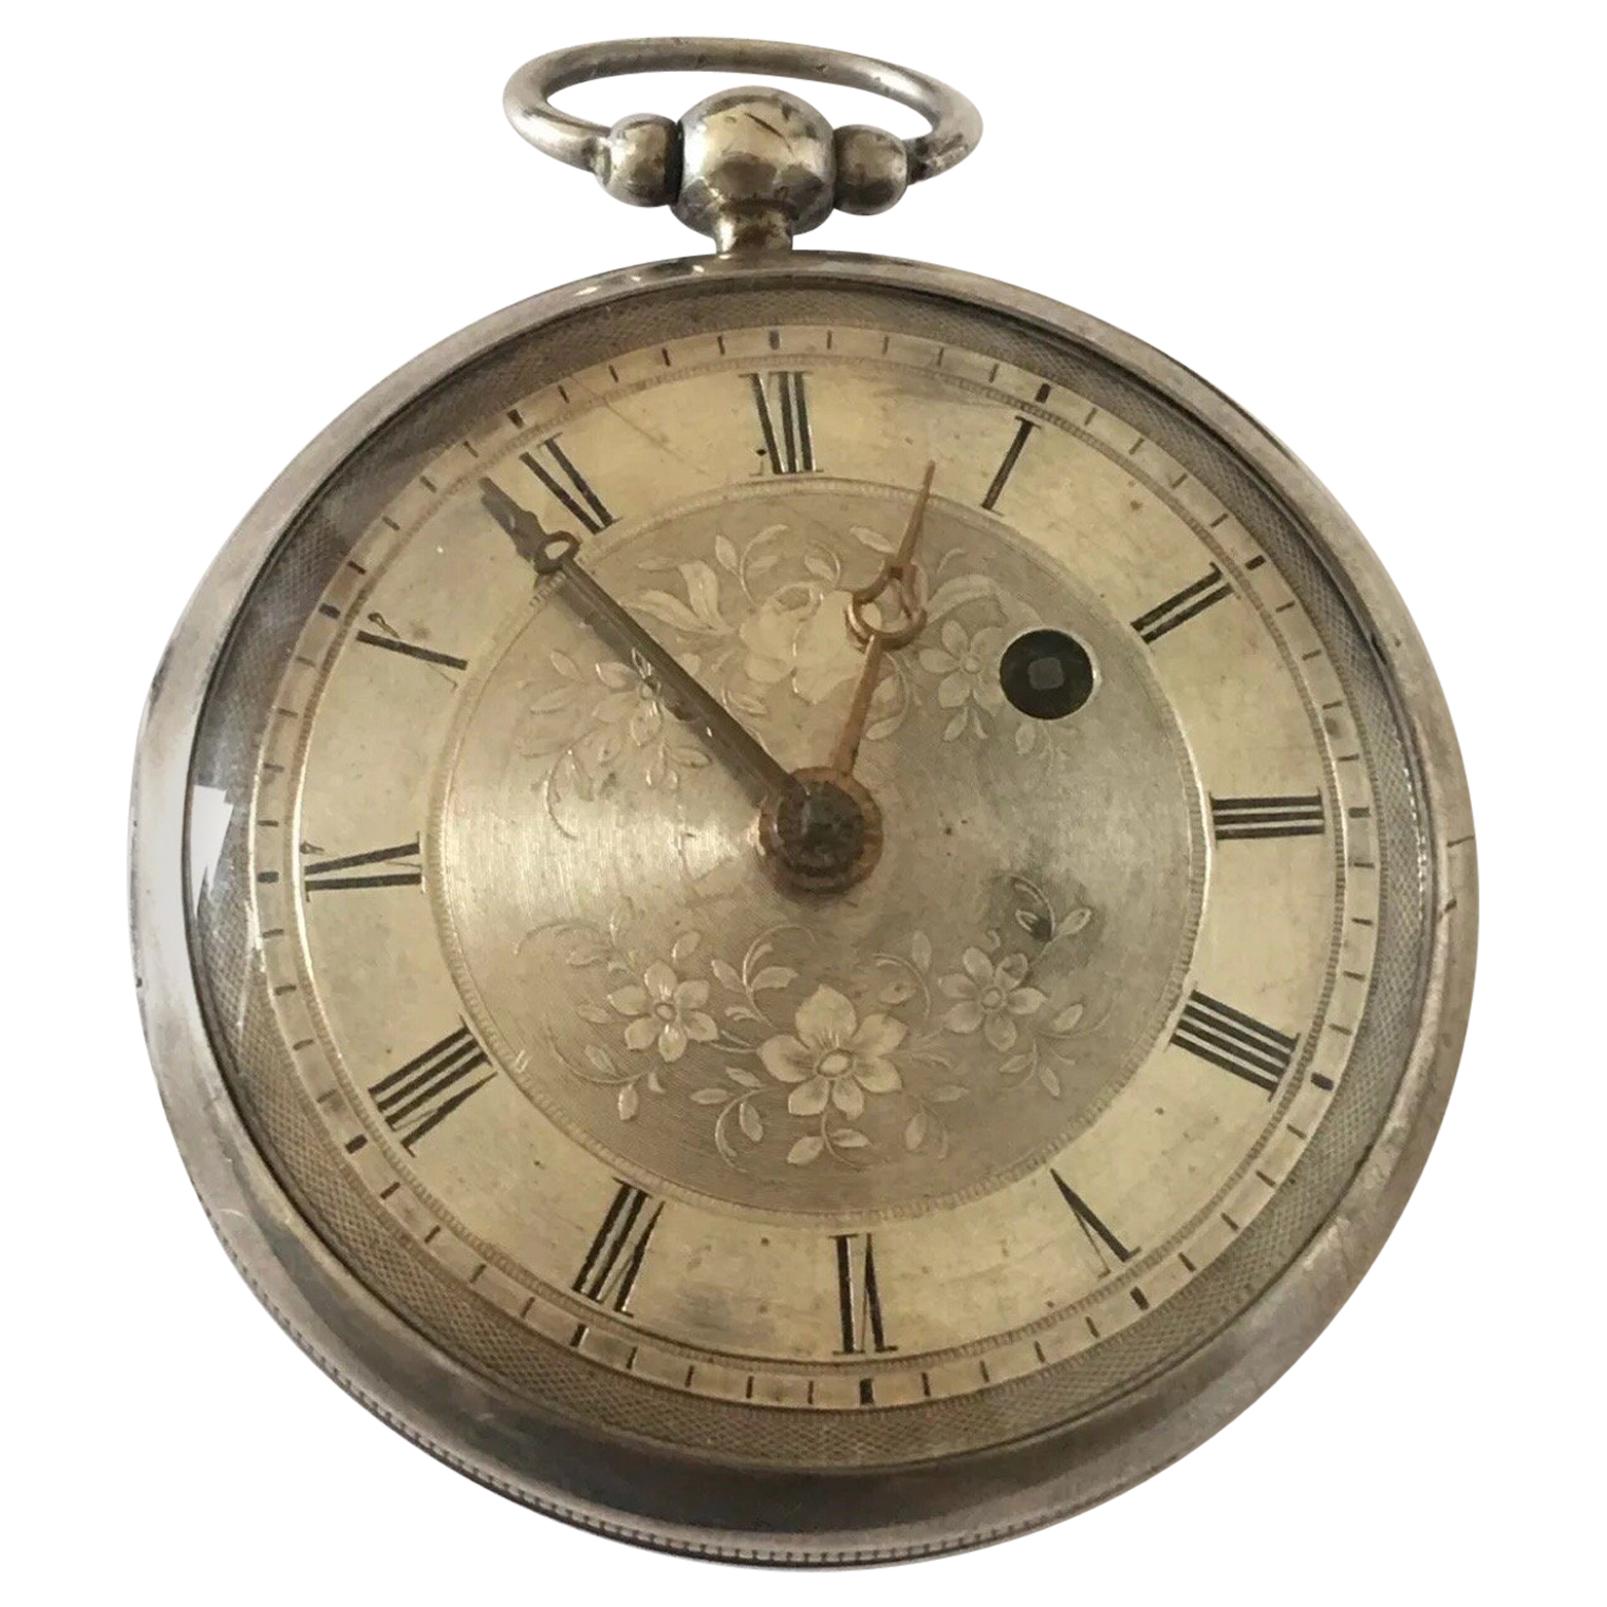 Rare and Early Verge Fusee Antique Silver Pocket Watch